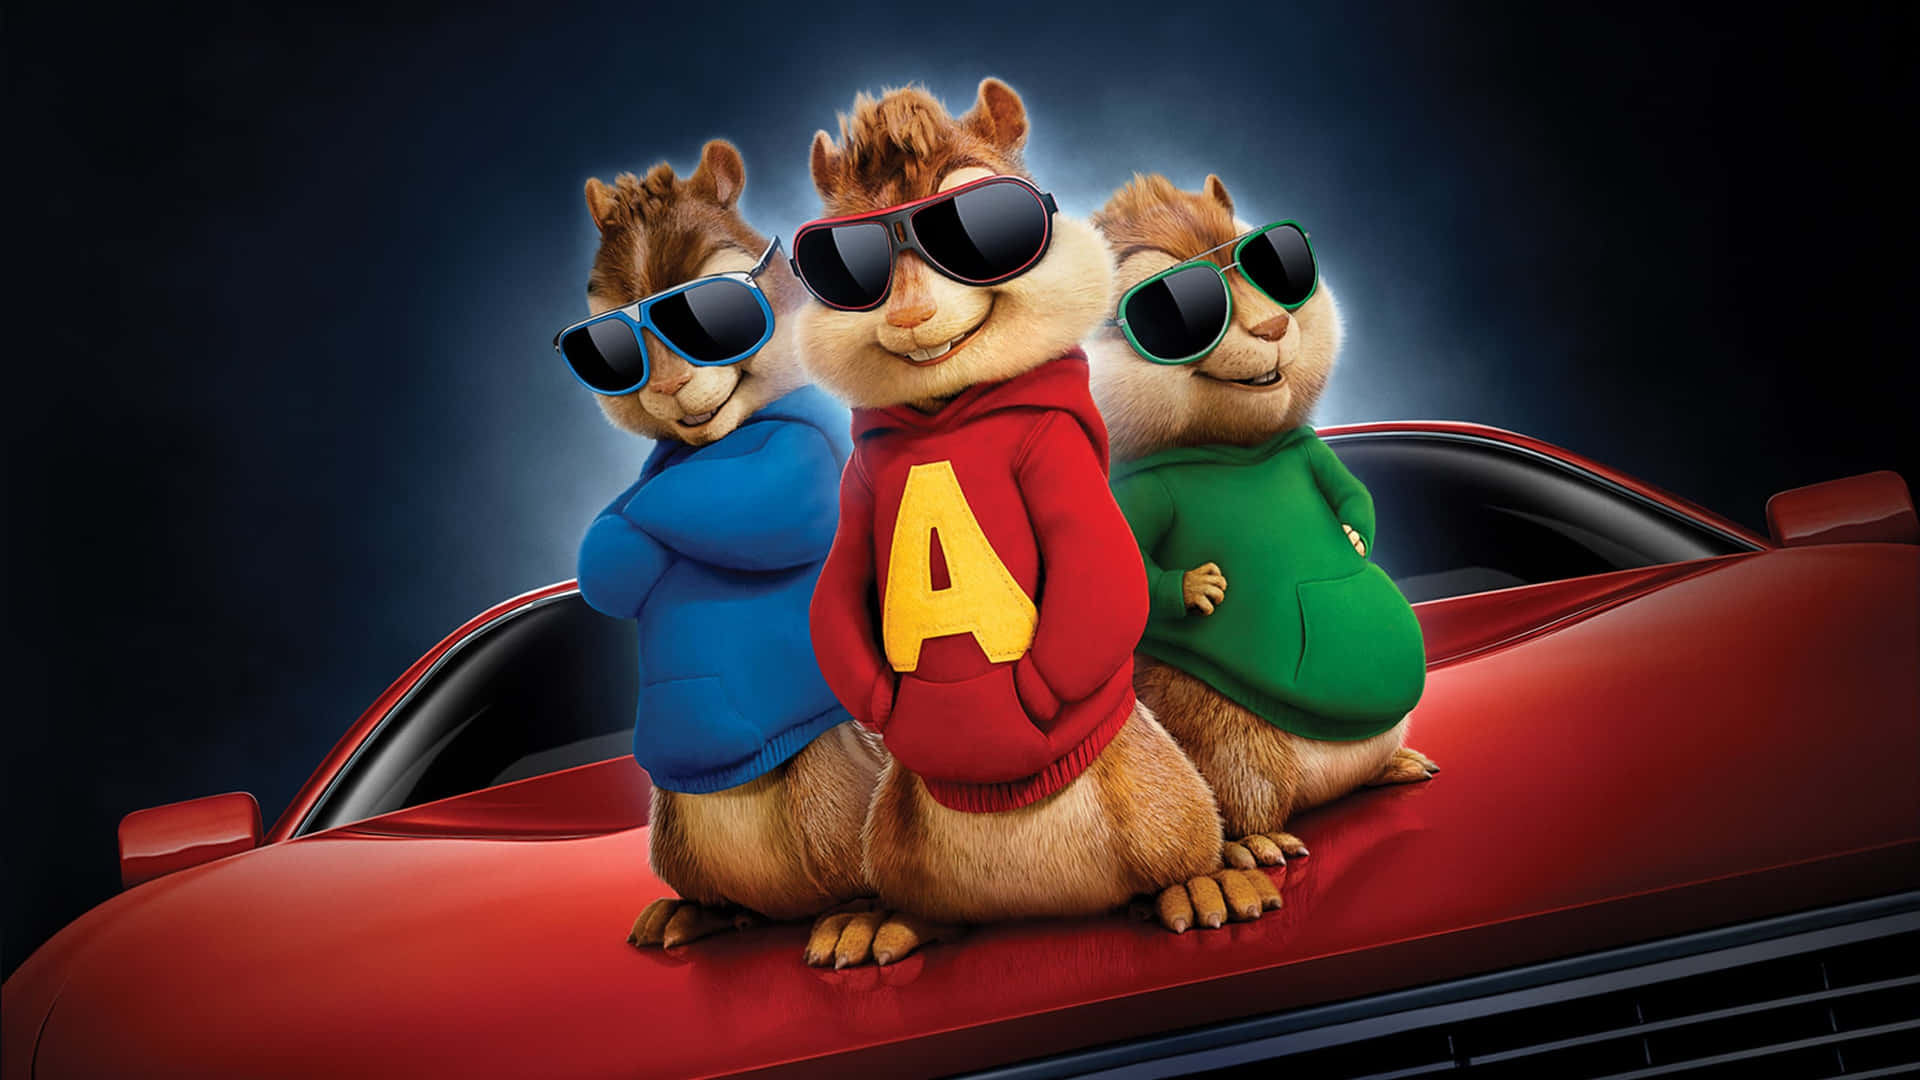 Alvin And The Chipmunks Movie Poster